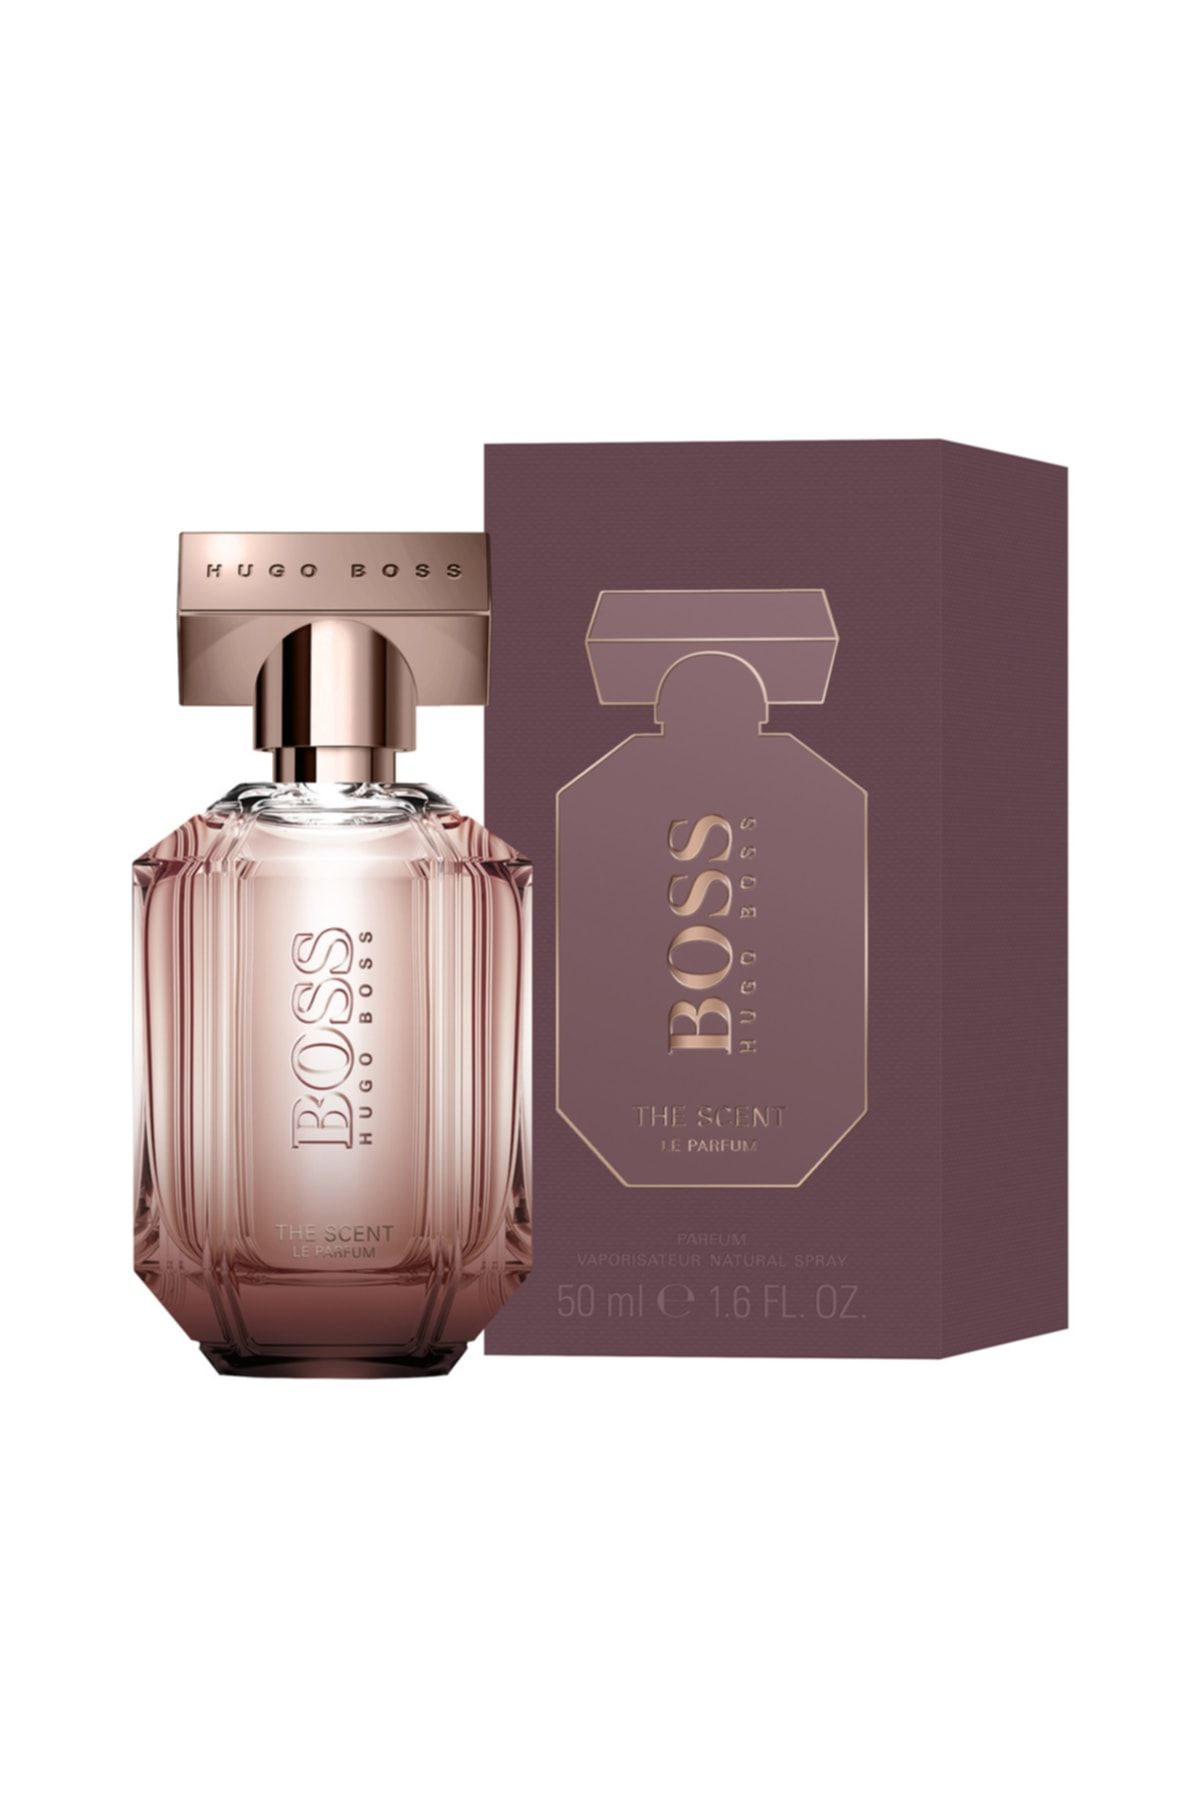 Hugo Boss The Scent Le Parfum For Her 50 میلی لیتر